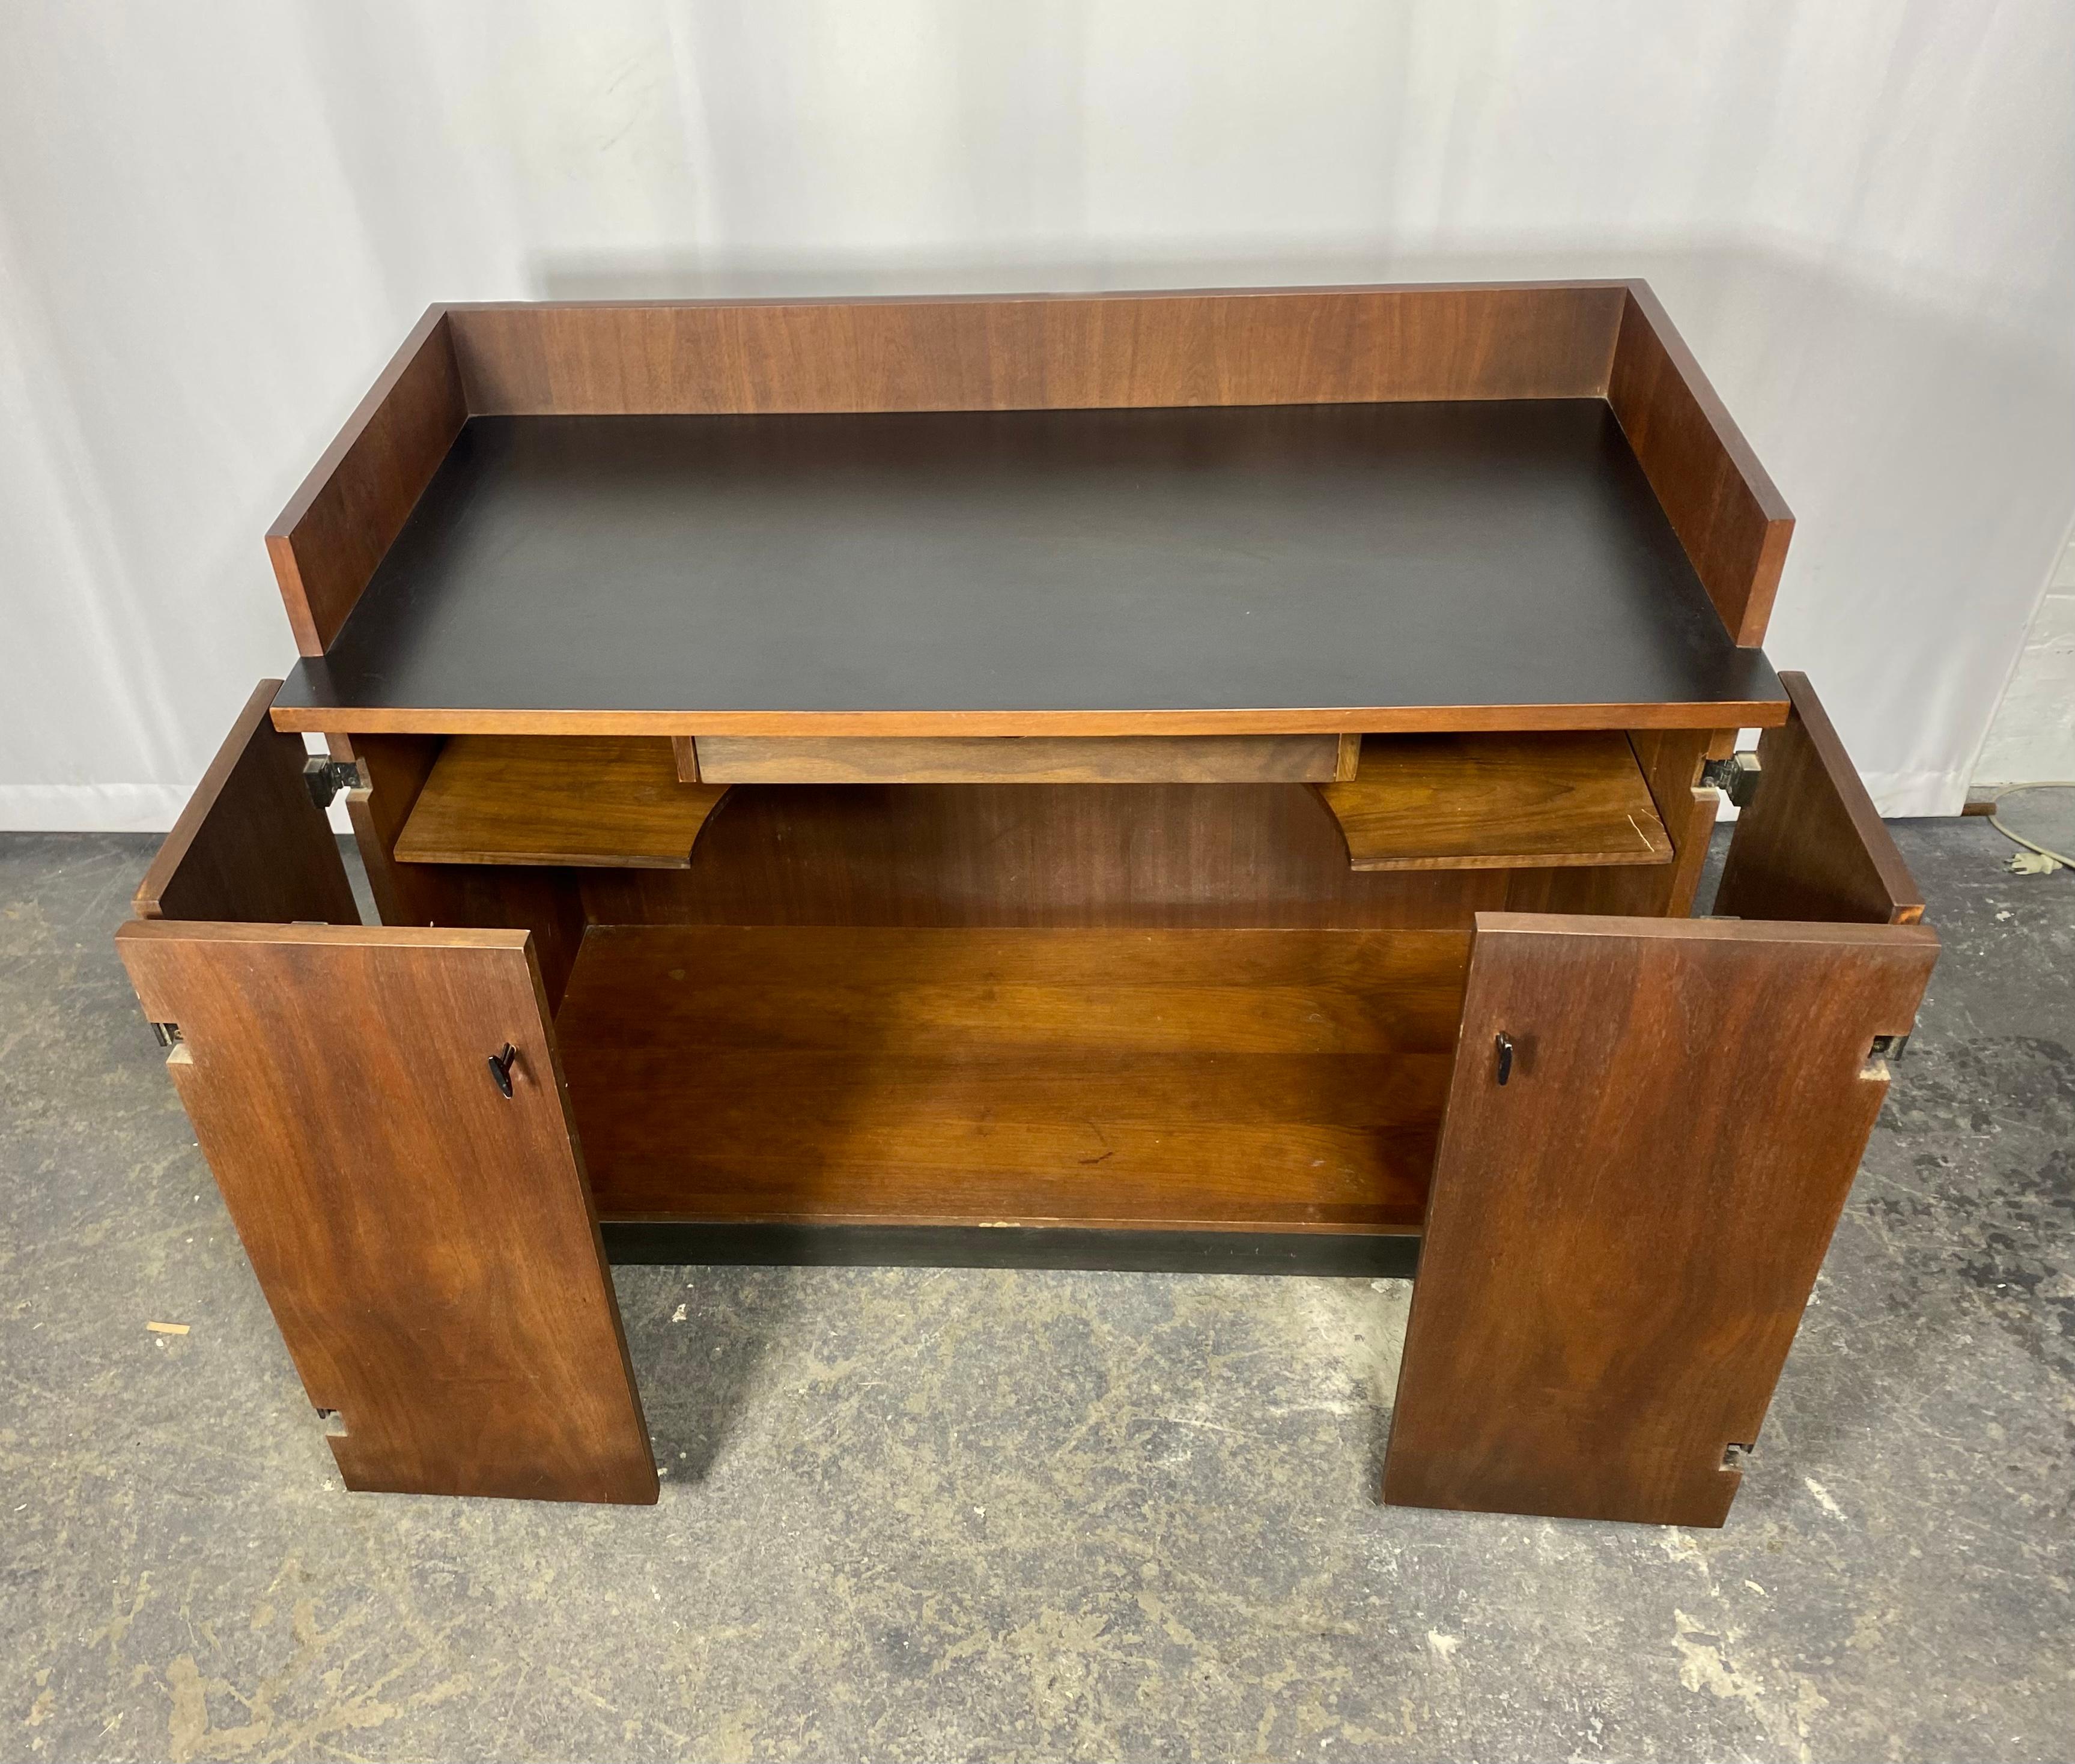 Mid-20th Century Modernist Walnut Bar Cart / Cabinet on Casters by Milo Baughman For Sale